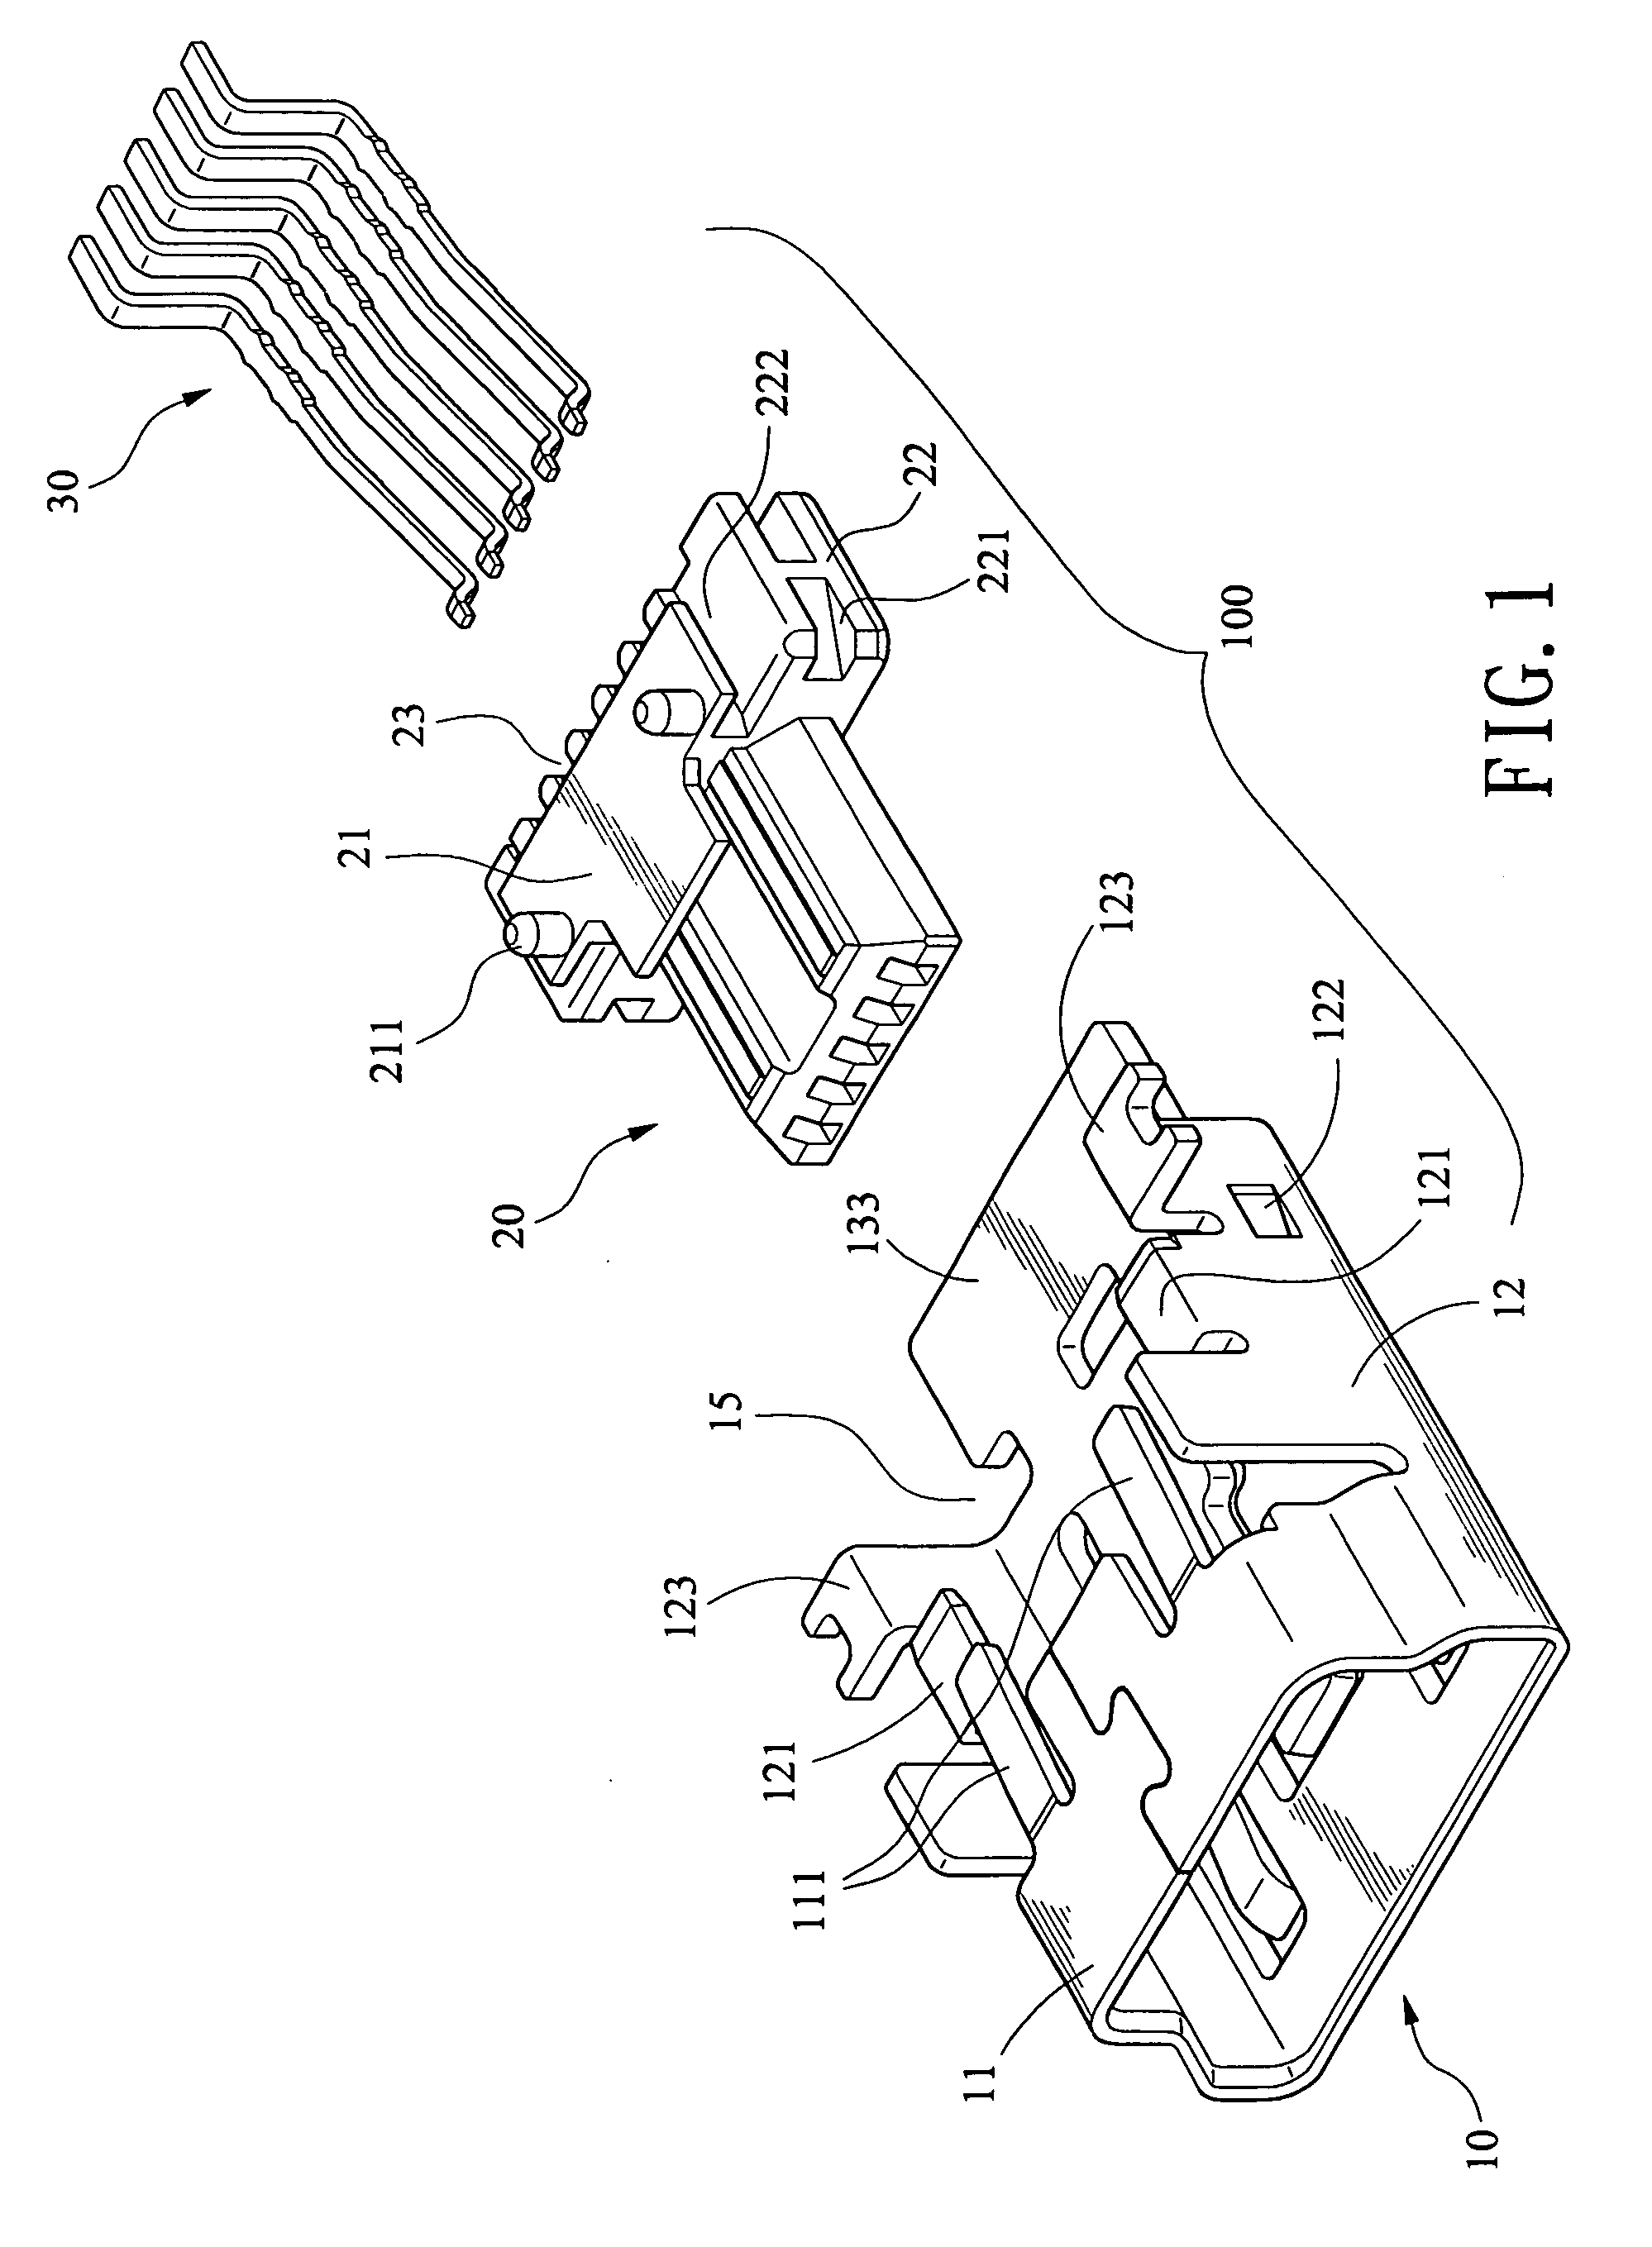 Mini-USB type electrical connector with latching arrangement